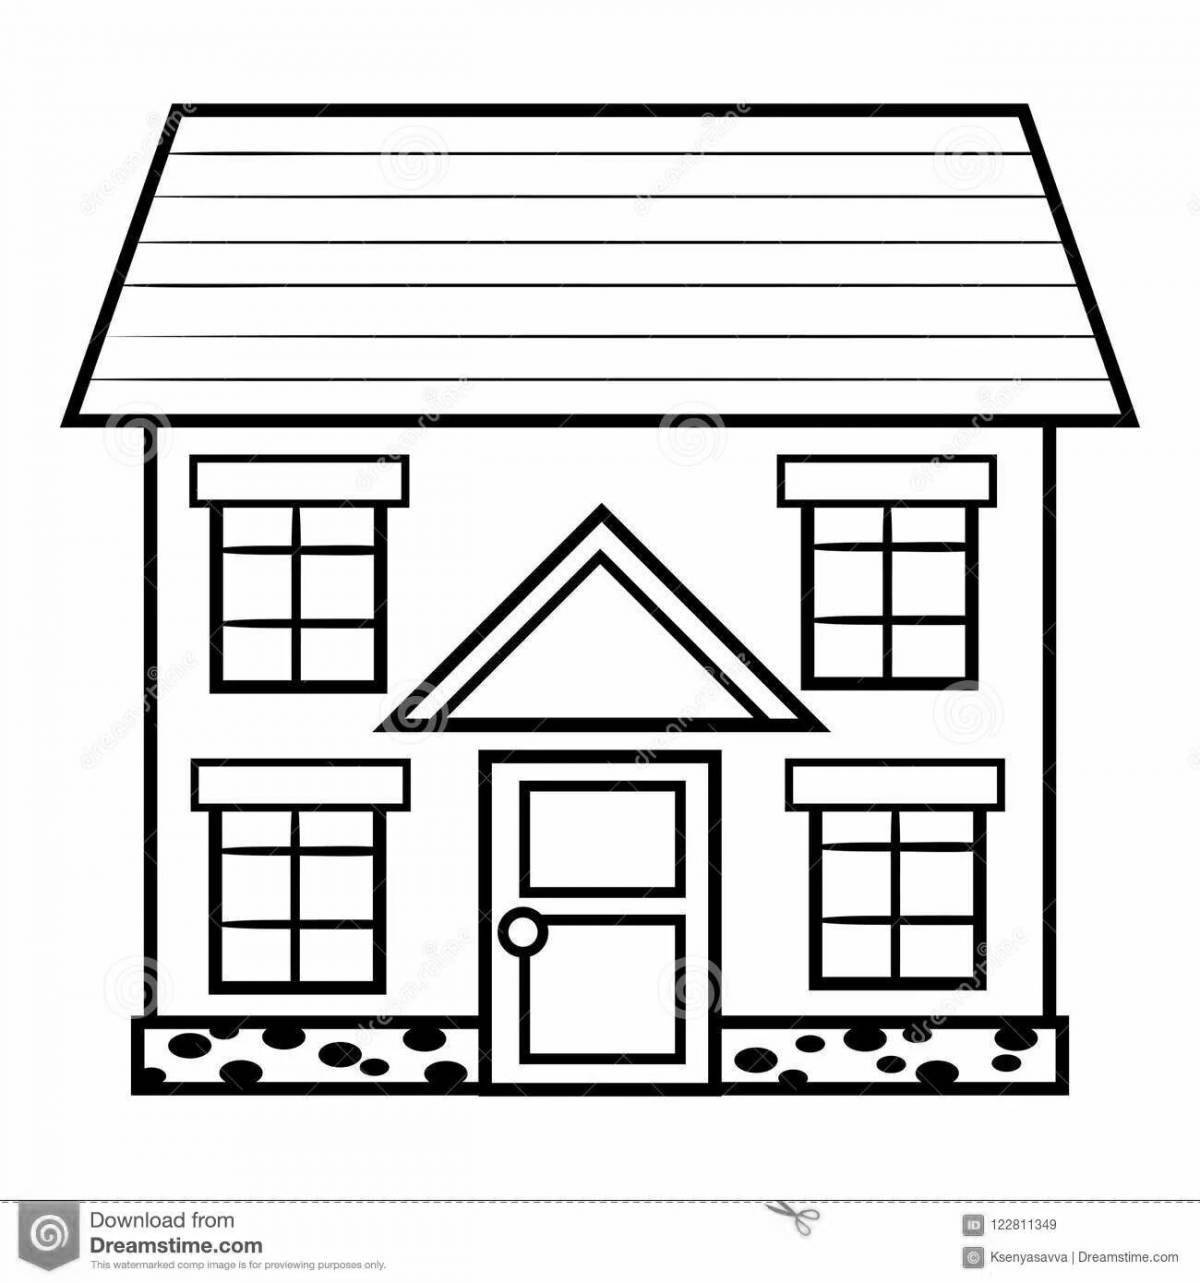 Coloring page of a magnificent three-storey house